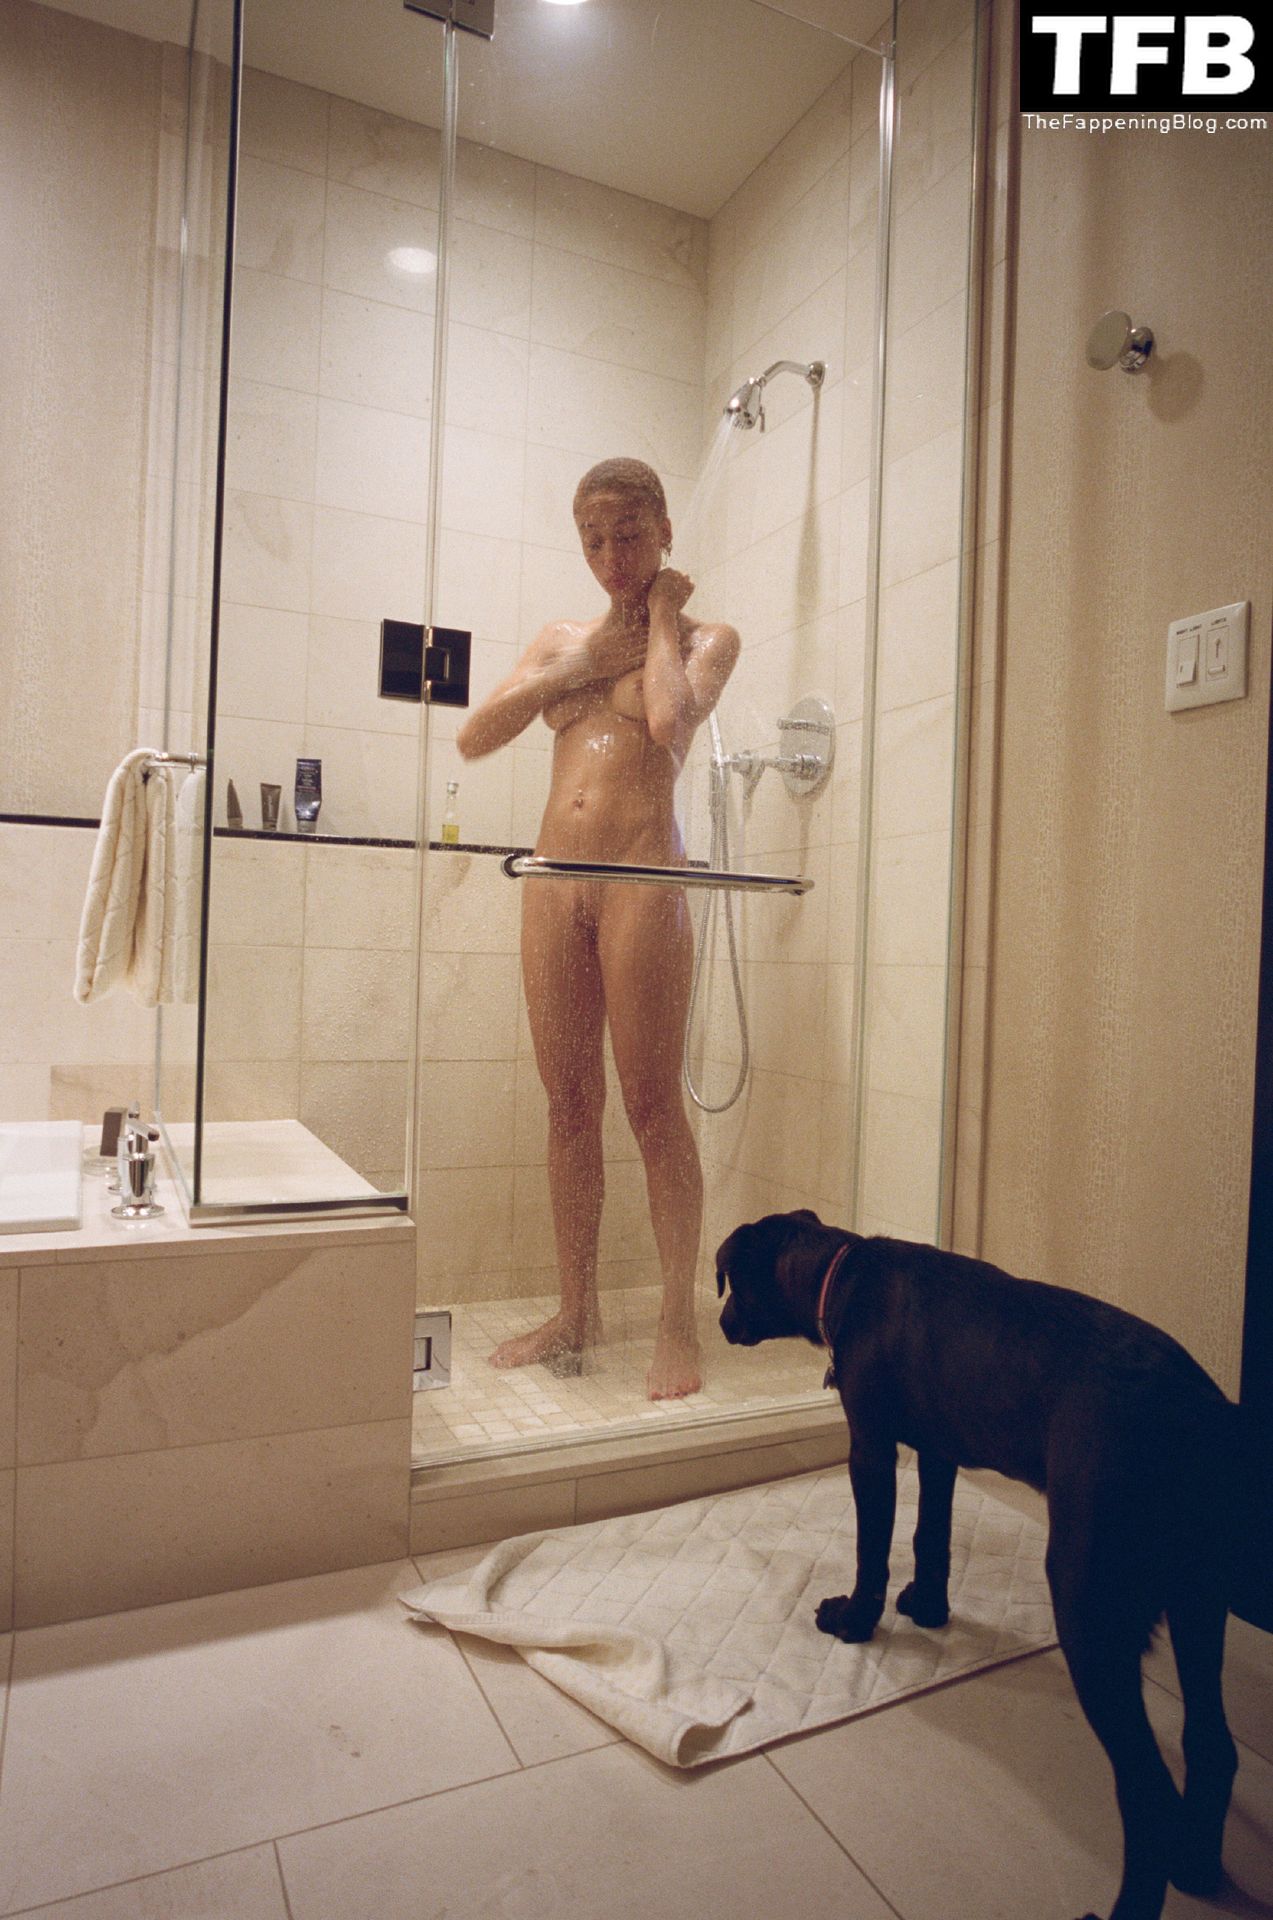 Adwoa-Aboah-Nude-Sexy-Leaked-The-Fappening-Blog-4.jpg